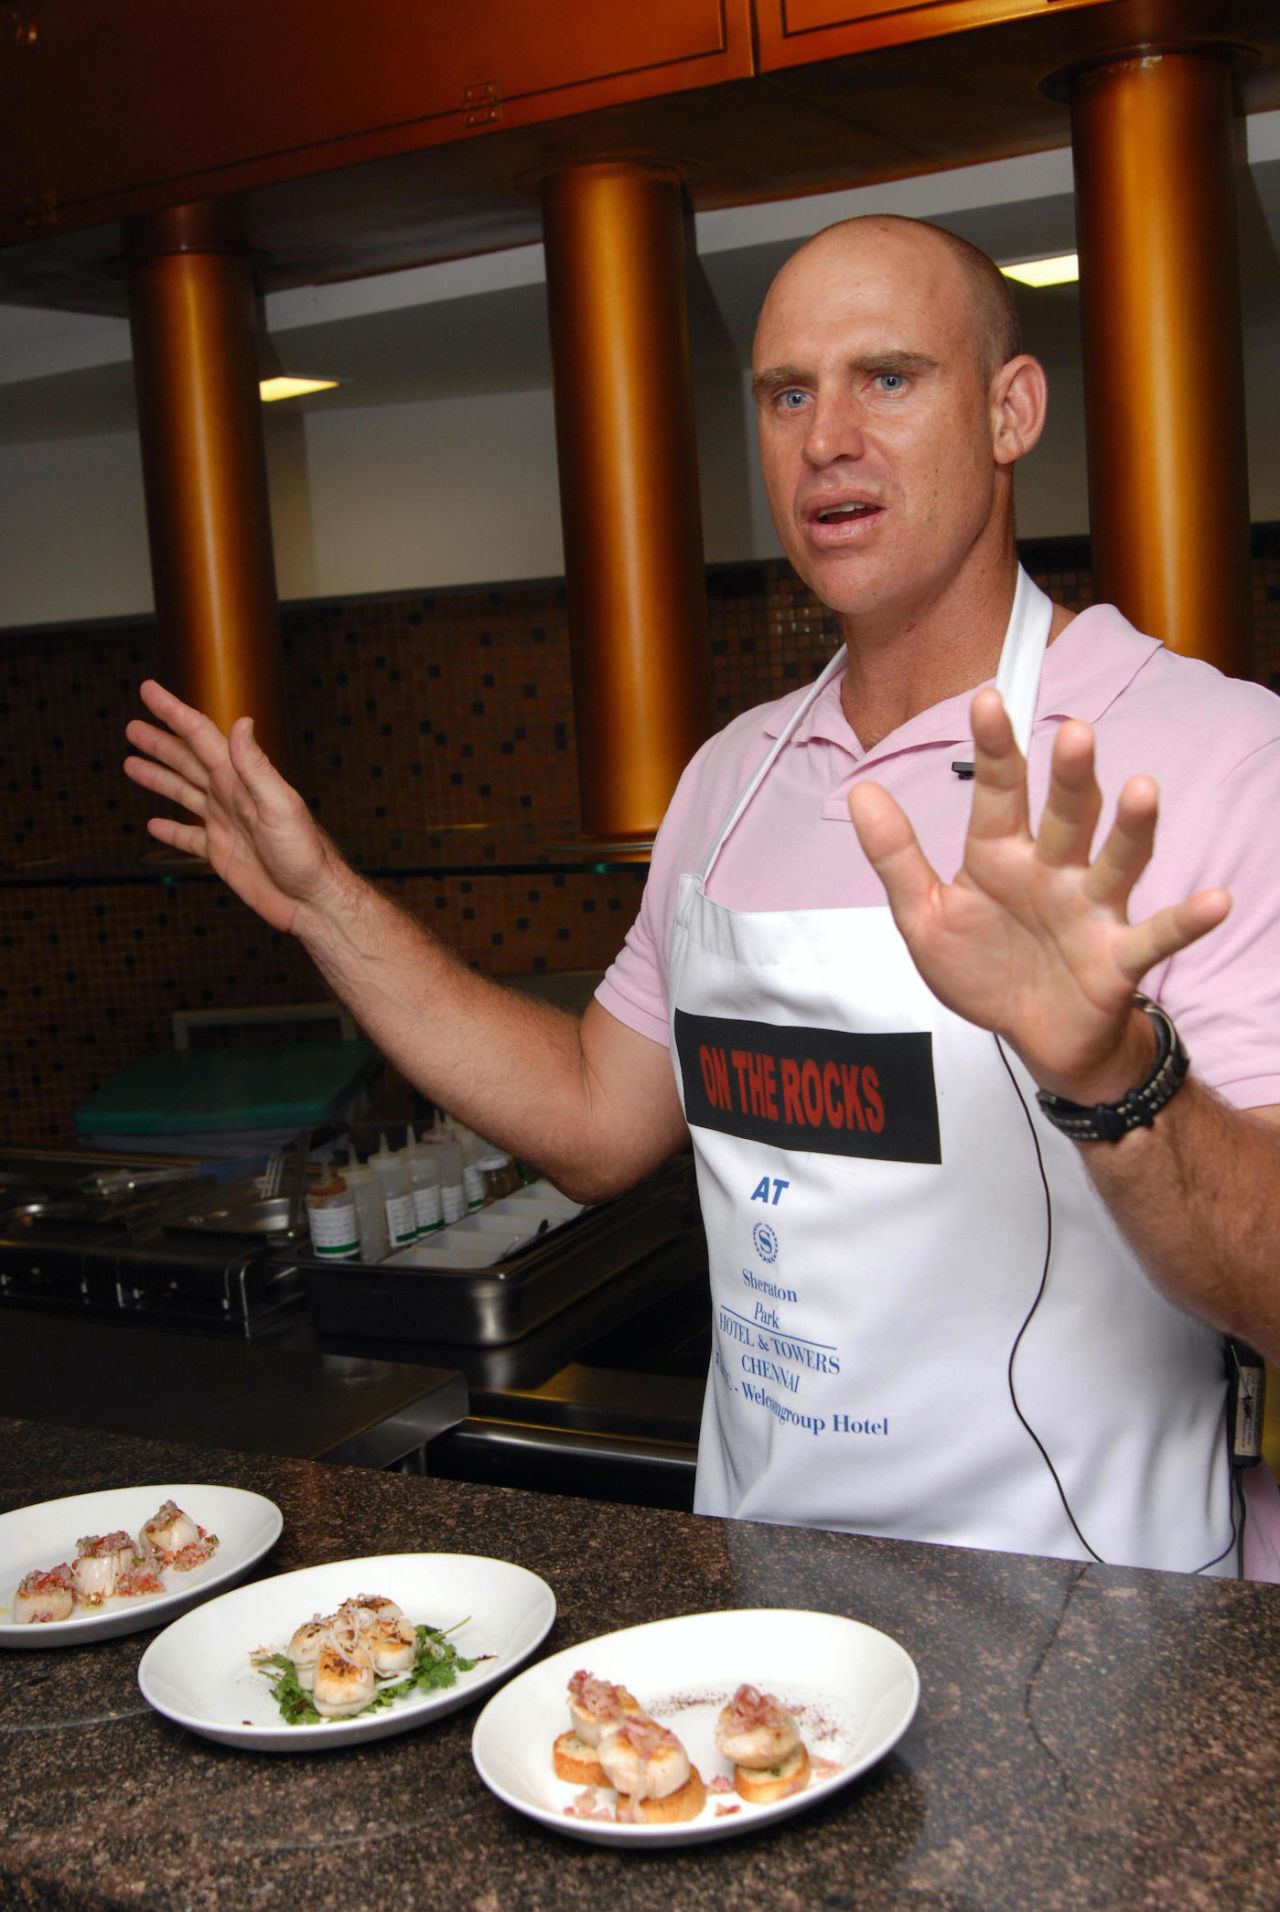 Matthew Hayden demonstrates his cooking skills during the inauguration of the On the Rocks restaurant at the Sheraton, Chennai on April 7, 2009